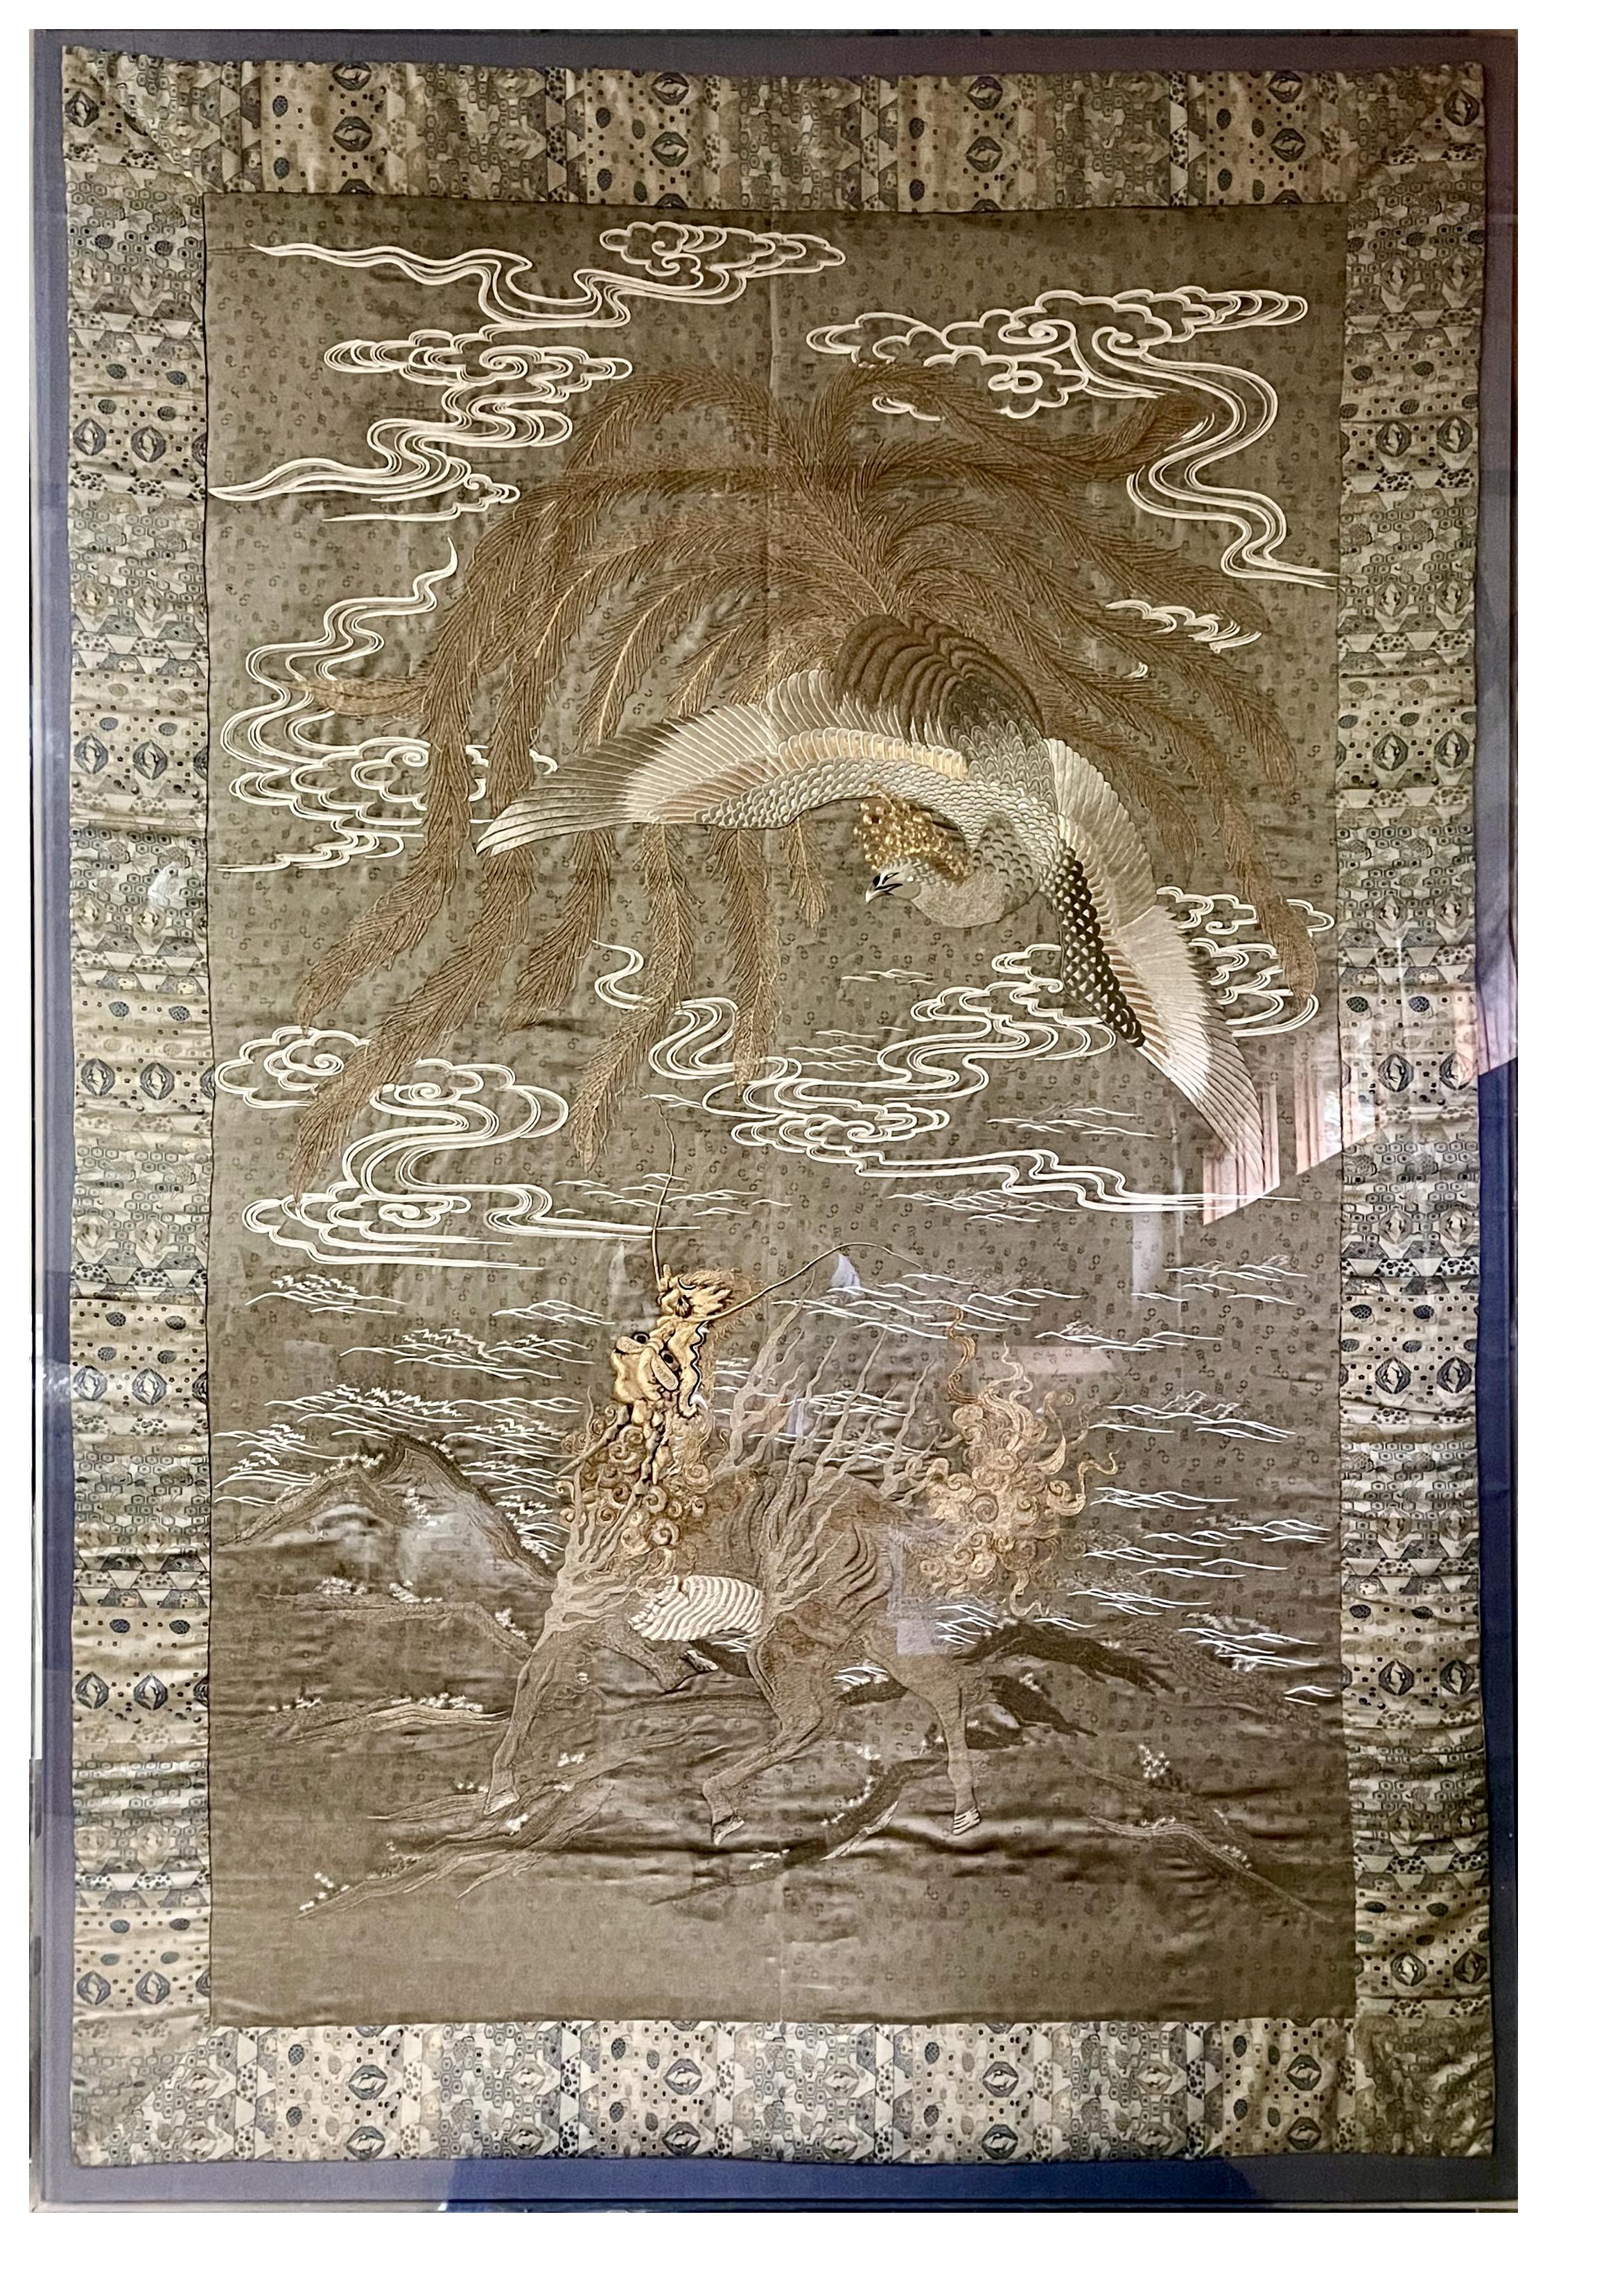 A massive Japanese embordered tapestry professionally displayed in a custom acrylic shadow box. The fine work of textile art is dated to 1890-1920s, late Meiji (1868-1912) or possibly Taisho (1912-1926) era. 
Presented with brocade border on linen